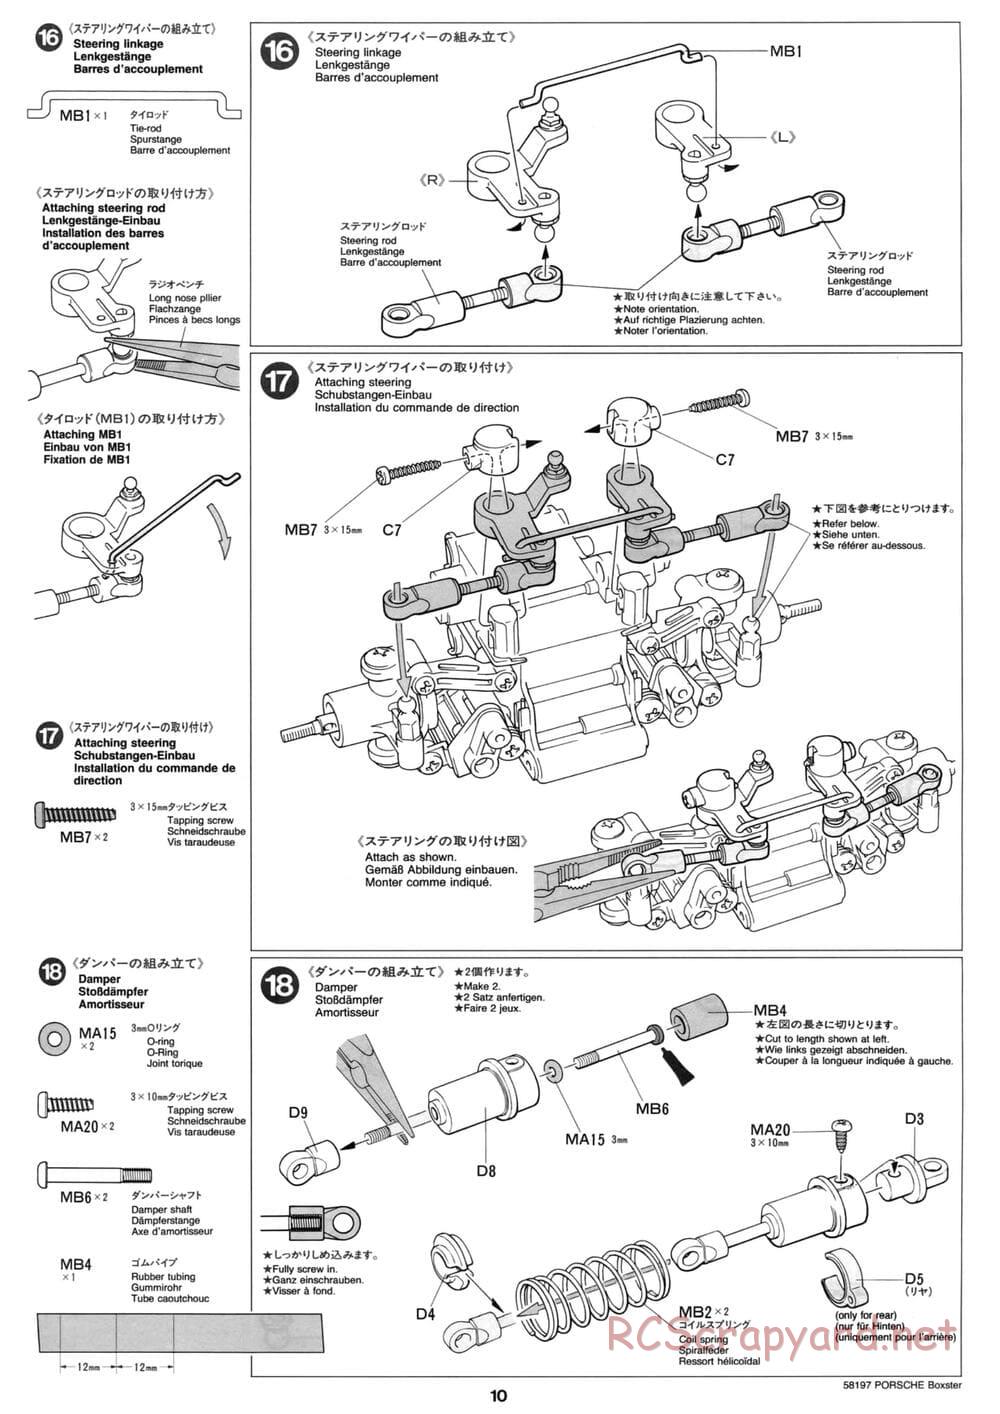 Tamiya - Porsche Boxster - M02L Chassis - Manual - Page 10